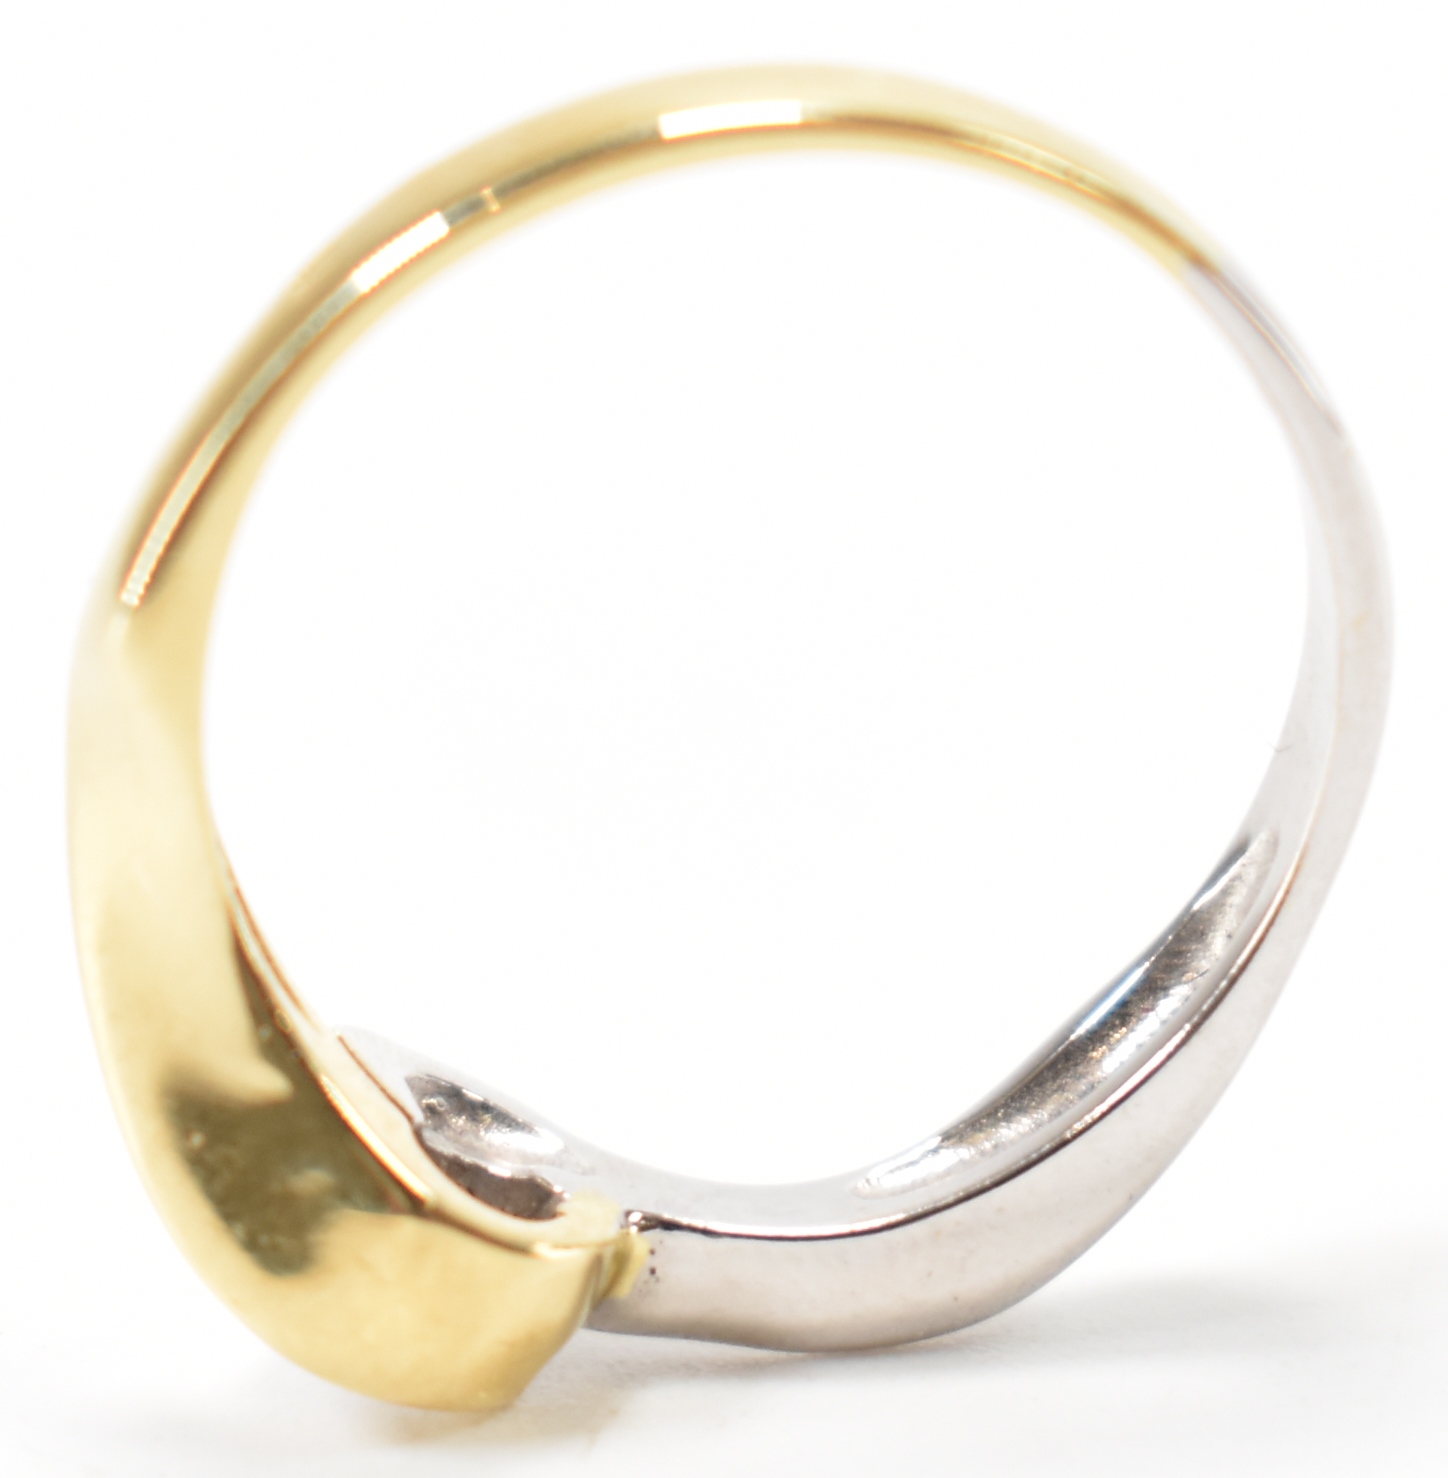 TWO TONE GOLD & DIAMOND CROSSOVER RING - Image 8 of 9